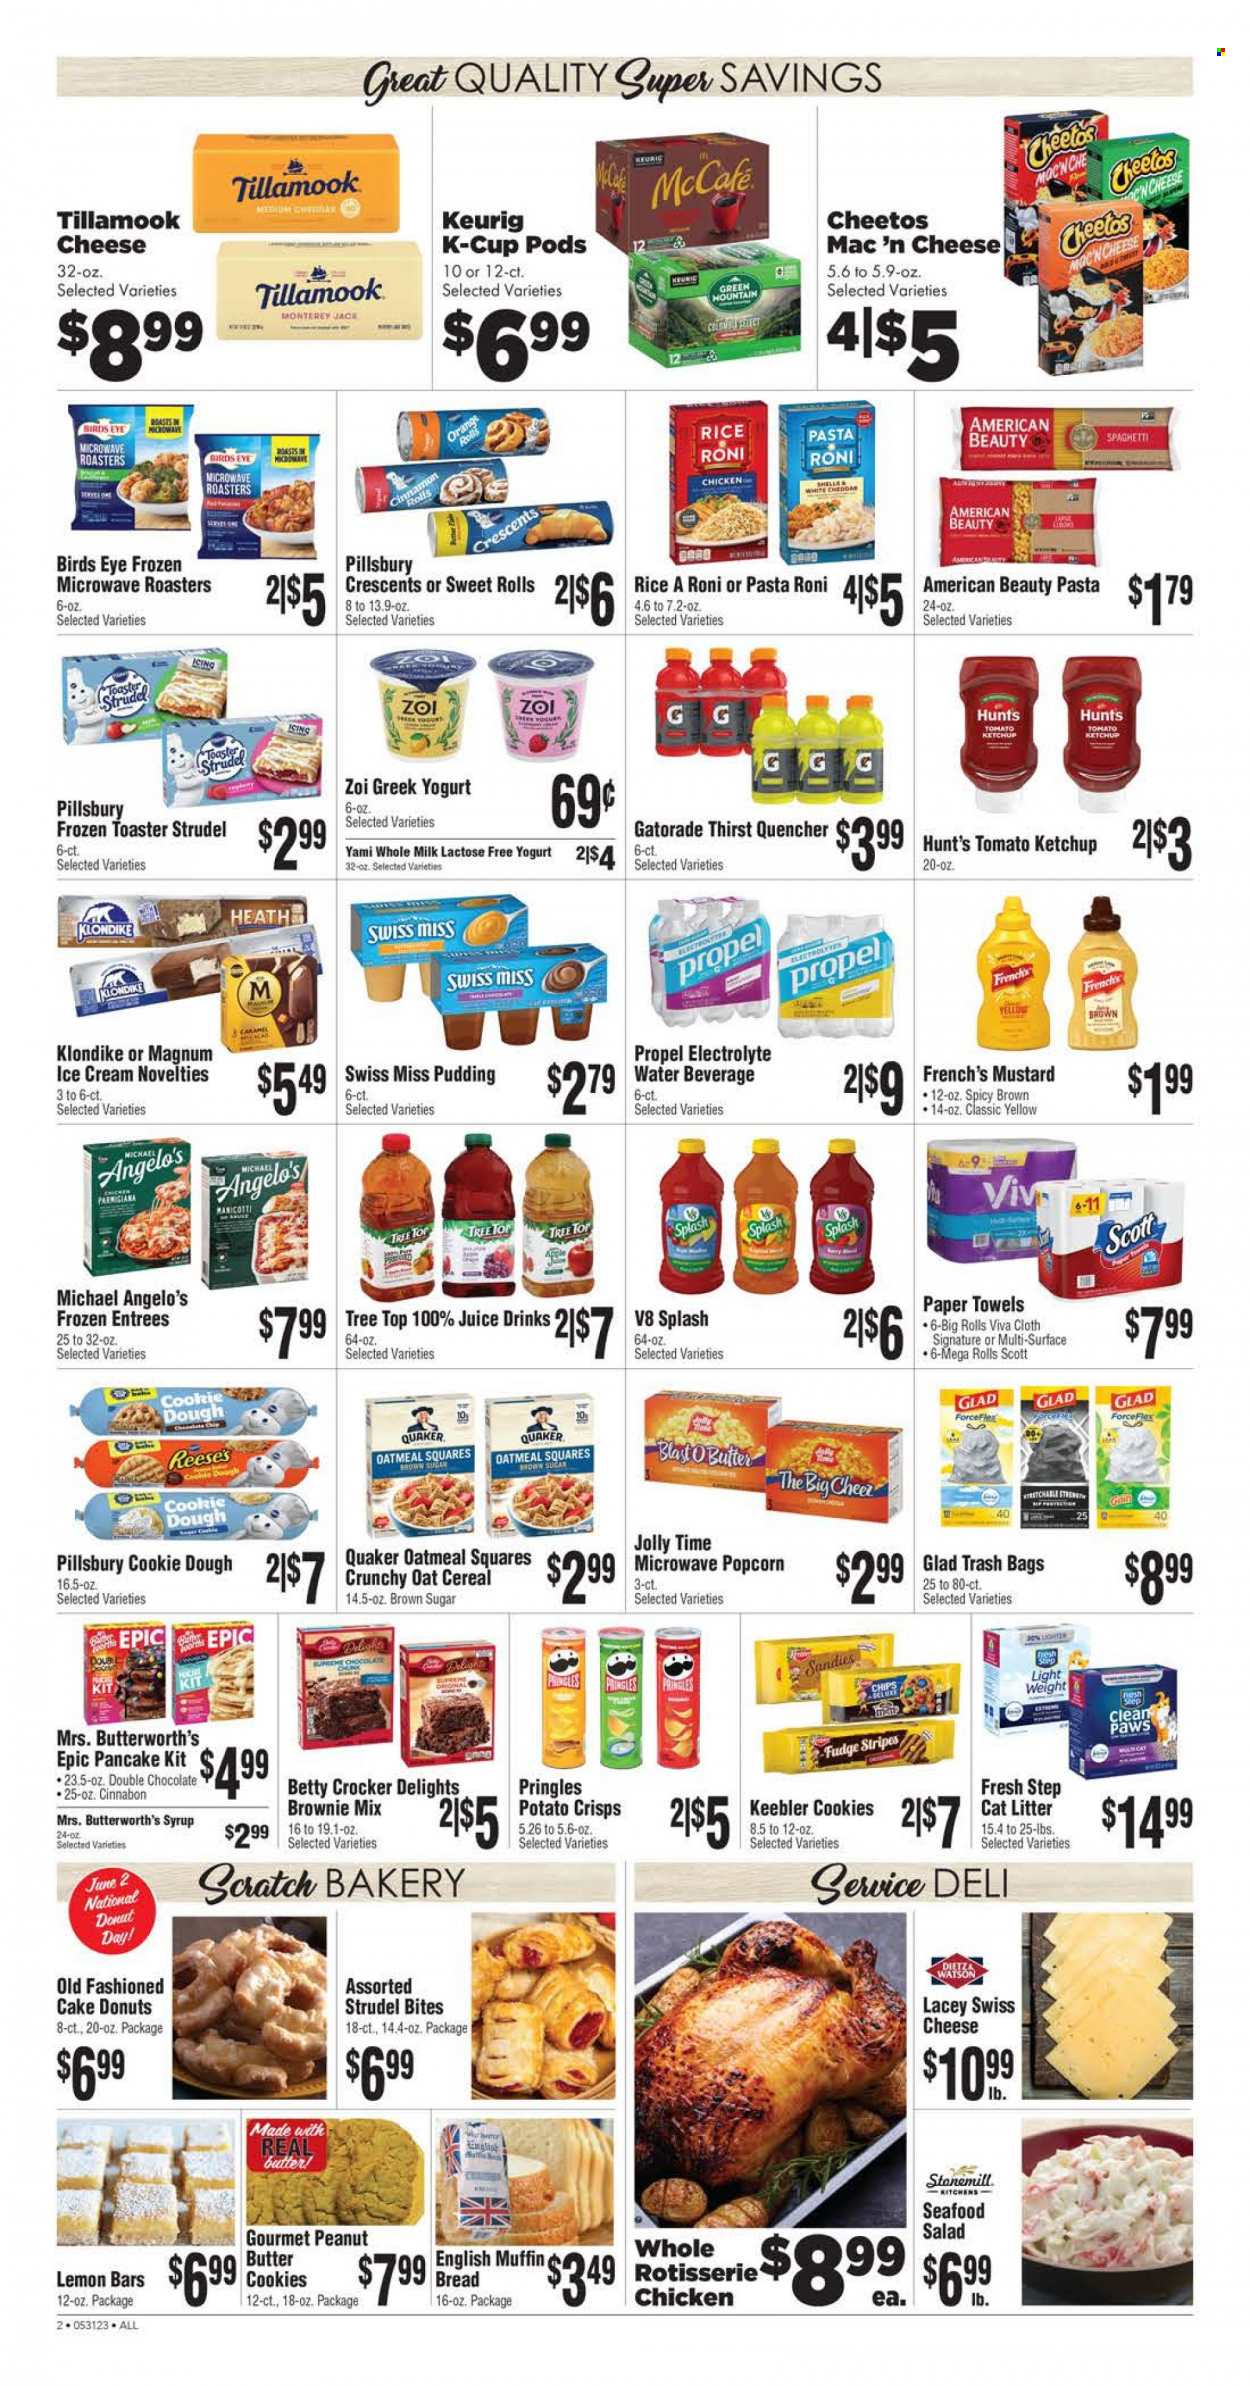 thumbnail - Rosauers Flyer - 05/31/2023 - 06/06/2023 - Sales products - bread, english muffins, strudel, donut, muffin, sweet rolls, brownie mix, oranges, seafood, spaghetti, chicken roast, pancakes, Pillsbury, Bird's Eye, Quaker, ready meal, seafood salad, Monterey Jack cheese, swiss cheese, greek yoghurt, pudding, Swiss Miss, Magnum, ice cream, Reese's, parmigiana, cookies, fudge, butter cookies, Keebler, potato crisps, Pringles, Cheetos, popcorn, salty snack, cane sugar, oatmeal, oats, cereals, rice, cinnamon, mustard, ketchup, syrup, juice, fruit drink, Gatorade, water, coffee capsules, McCafe, K-Cups, Keurig, Green Mountain, Scott, kitchen towels, paper towels, Gain, Hask, bag, trash bags, cat litter, Paws, Fresh Step, electrolyte drink. Page 2.